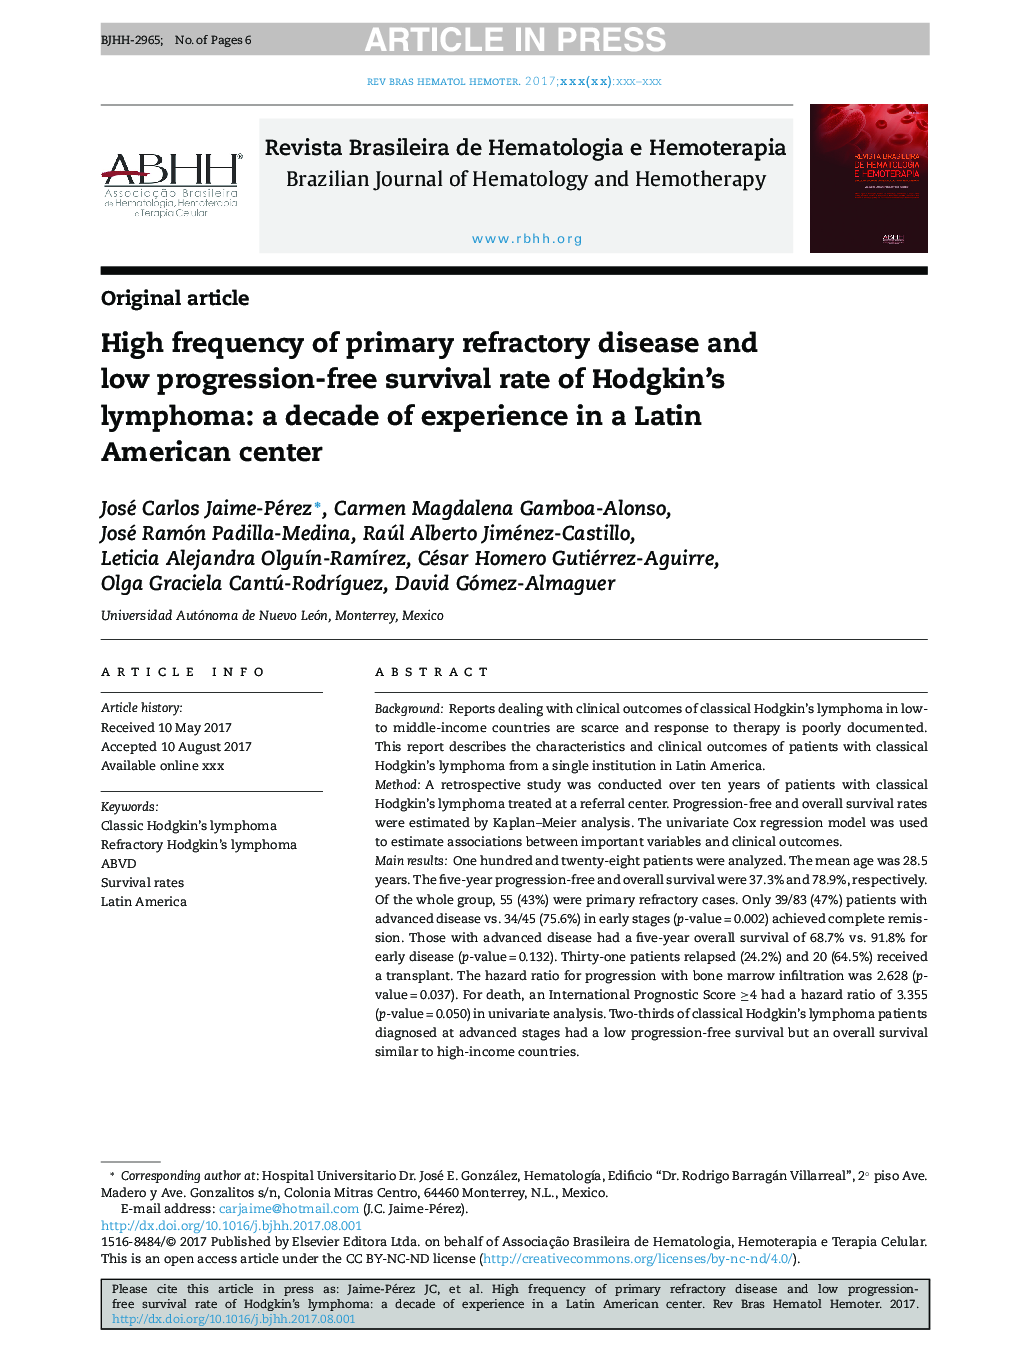 High frequency of primary refractory disease and low progression-free survival rate of Hodgkin's lymphoma: a decade of experience in a Latin American center